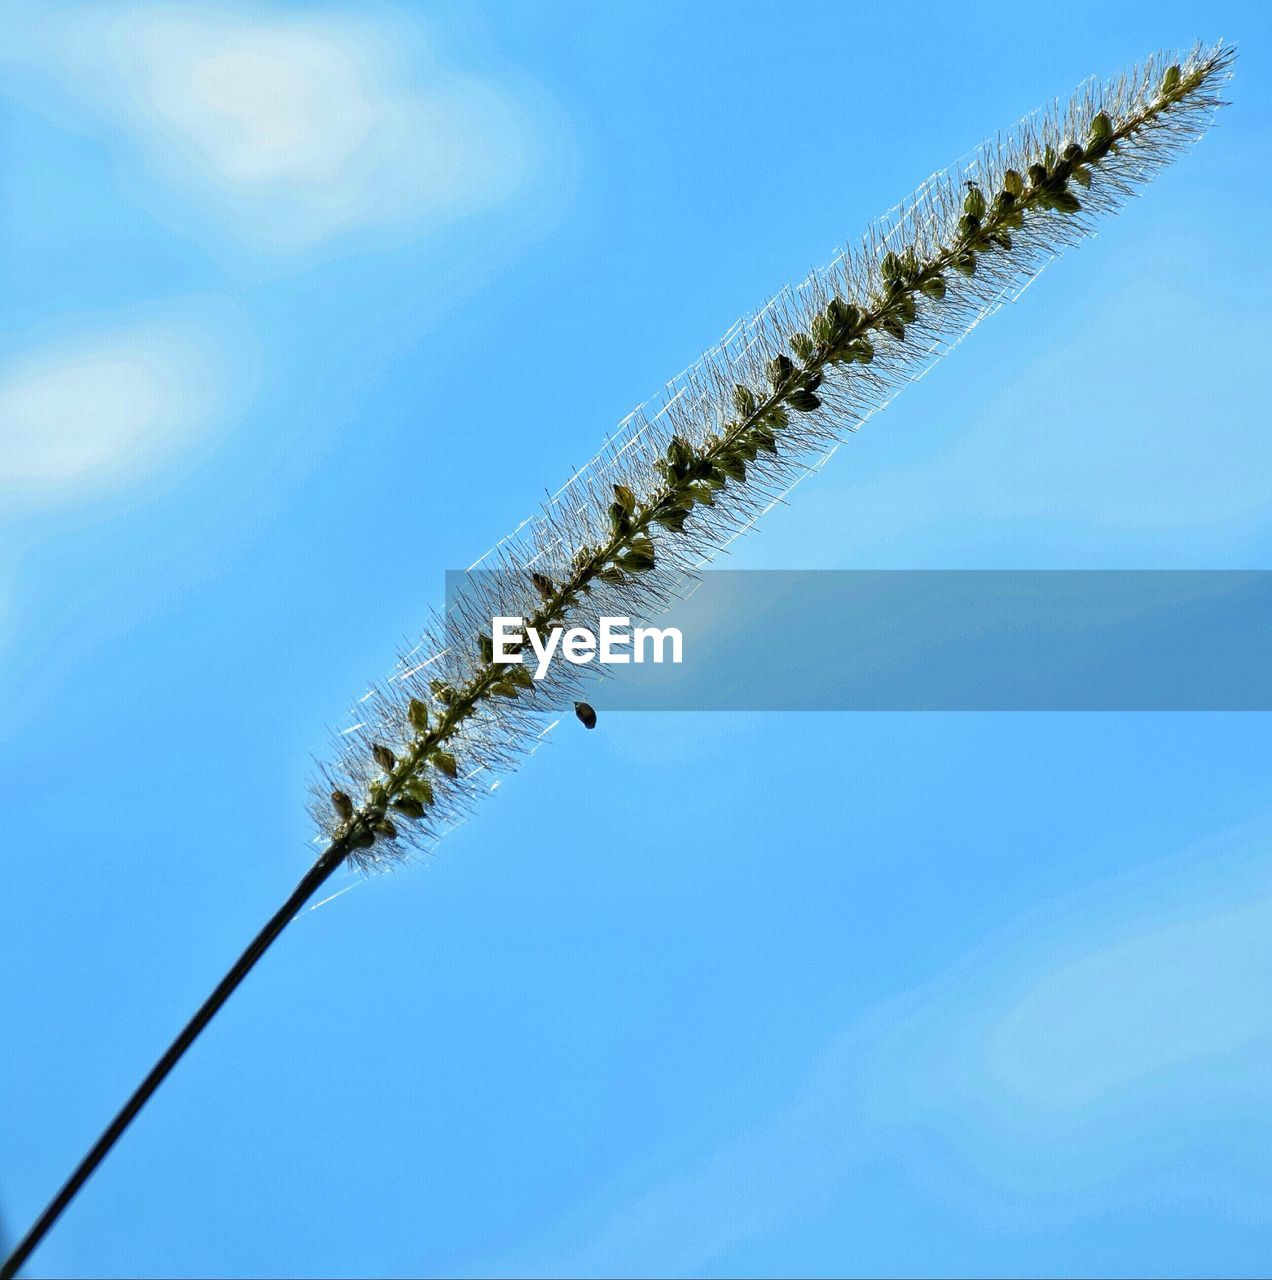 CLOSE-UP OF PLANT AGAINST BLUE SKY